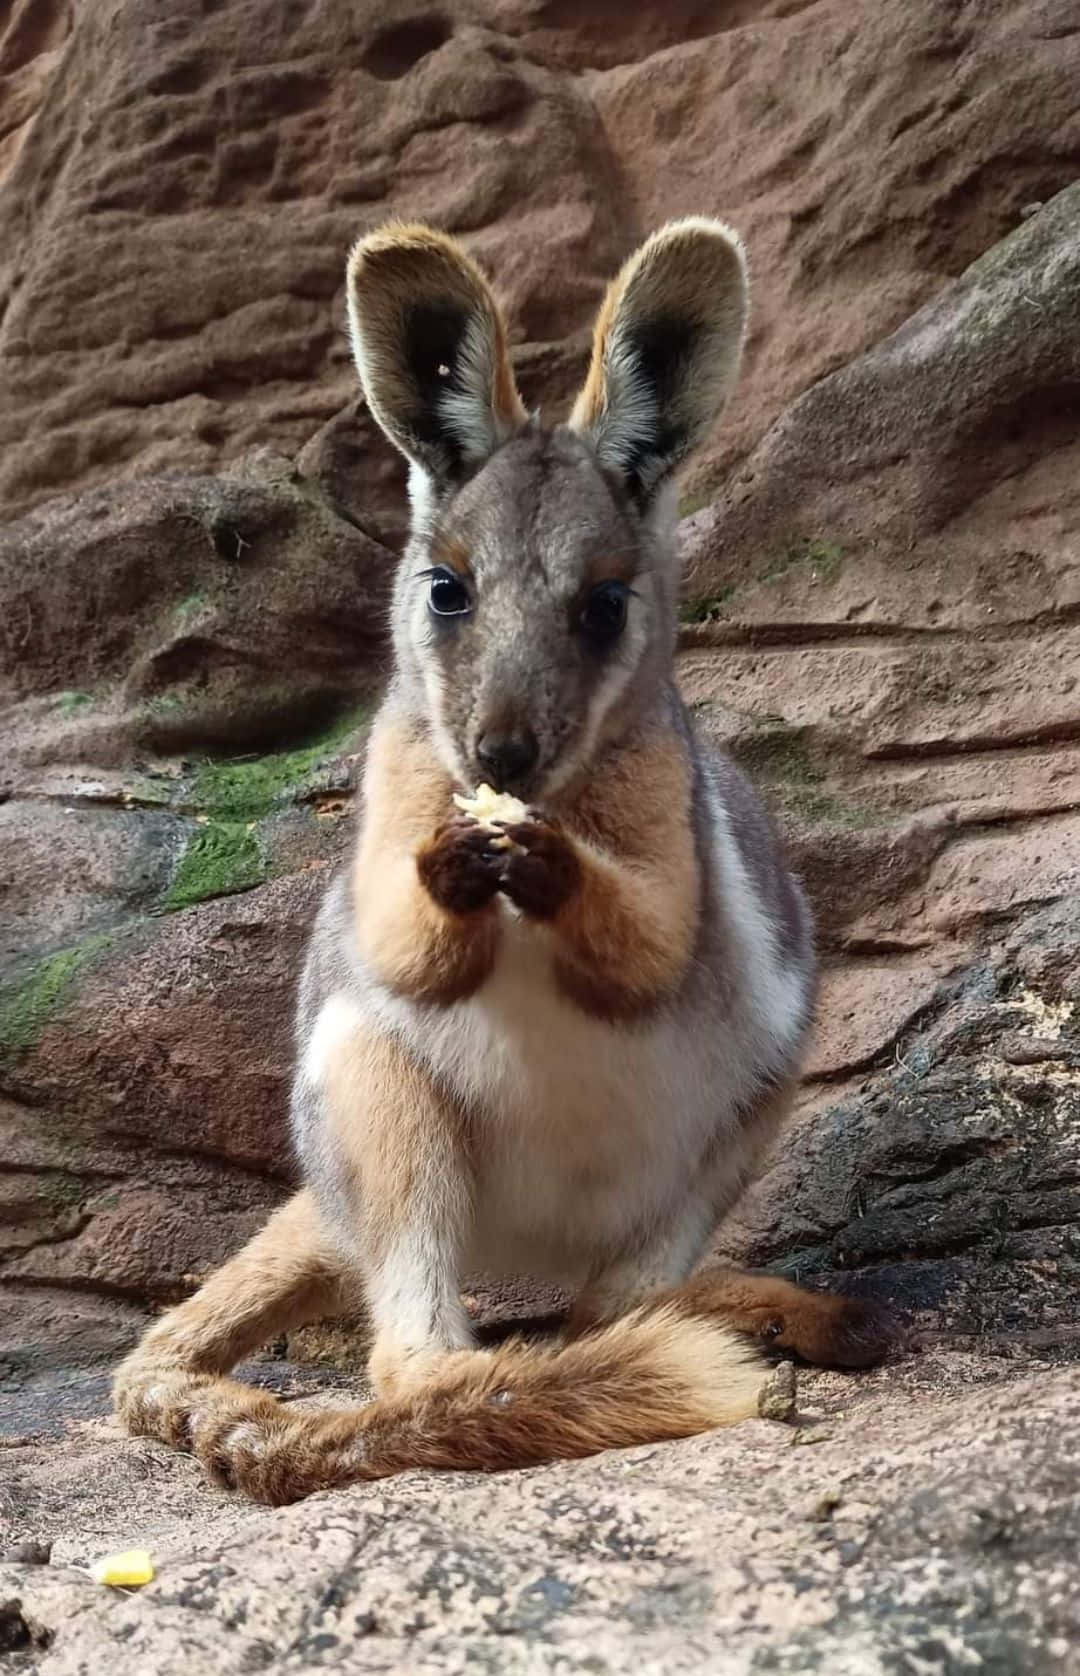 Wallaby Snack Time.jpg Wallpaper